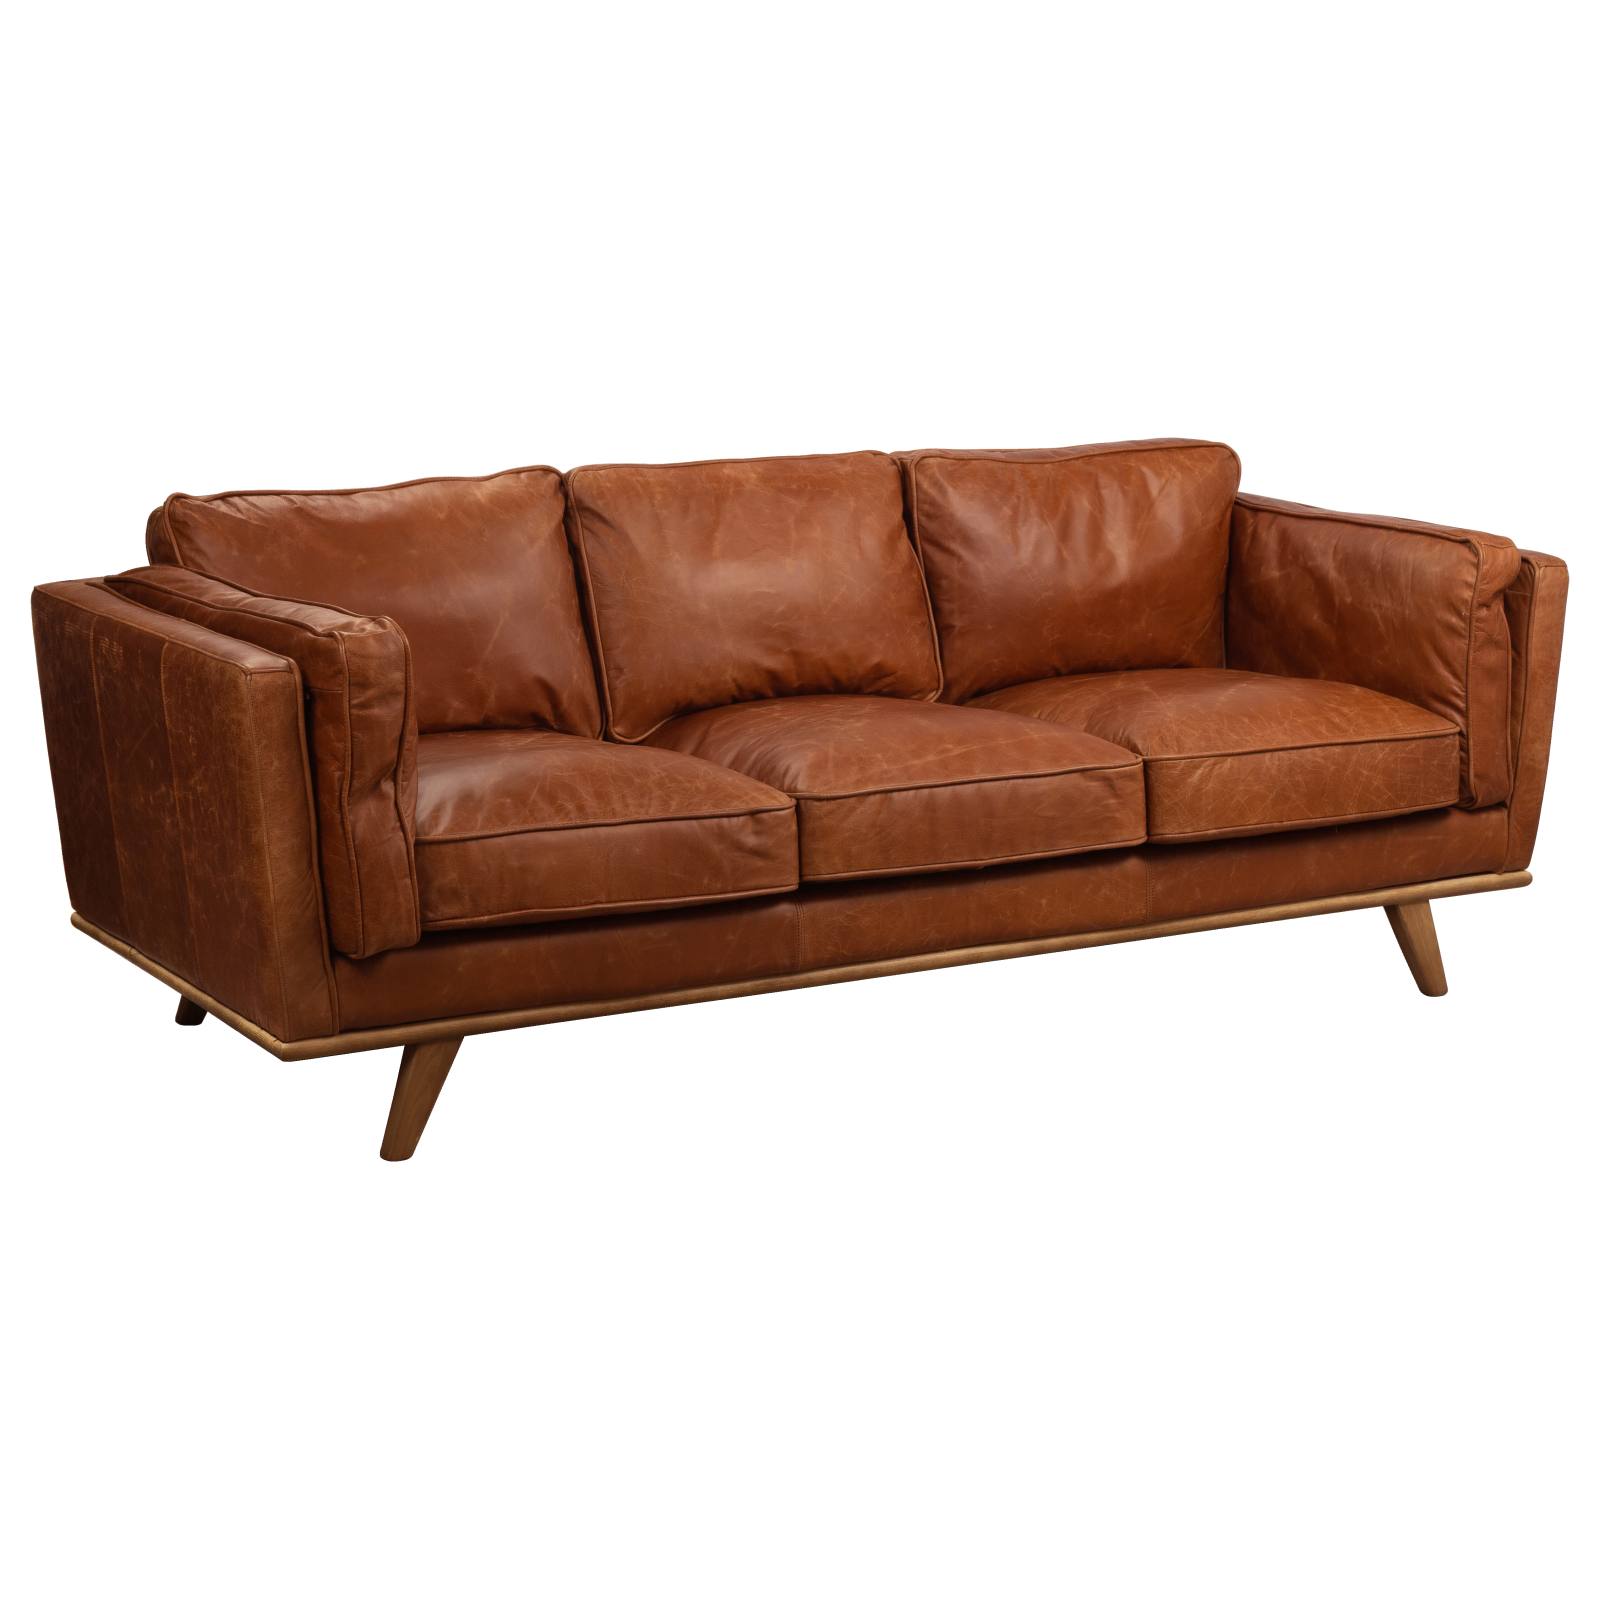 Laa 3 Seater Leather Sofa Vintage, Soft Leather Couch